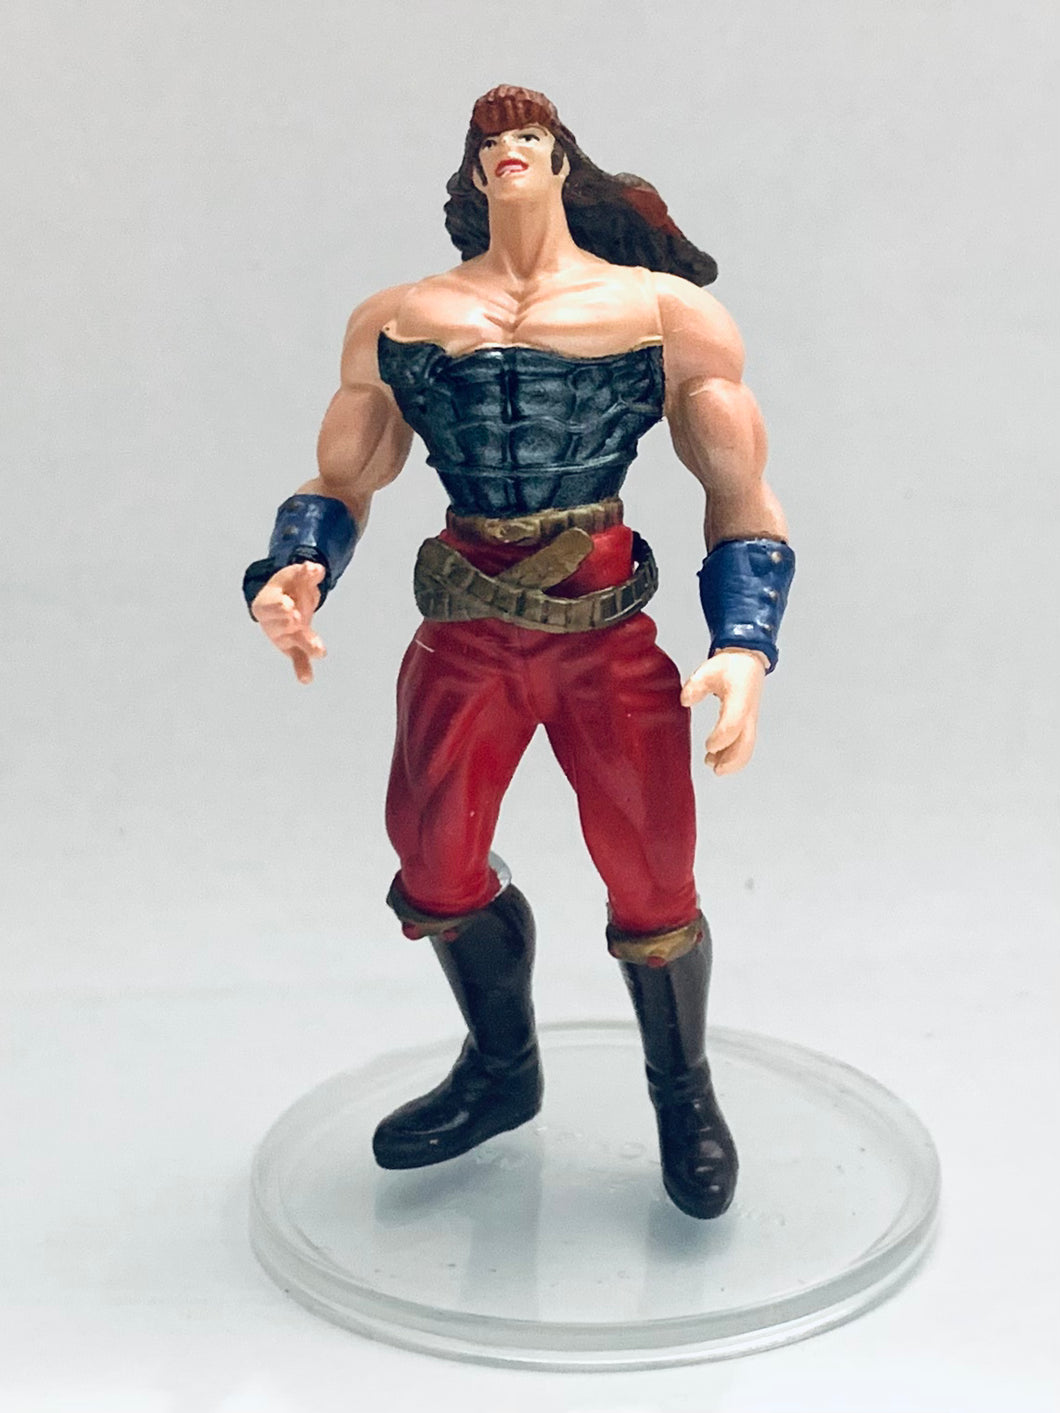 Hokuto no Ken - Yuda - Fist of the North Star All-Star Retsuden Capsule Figure Collection Part 1 - Repainted ver.